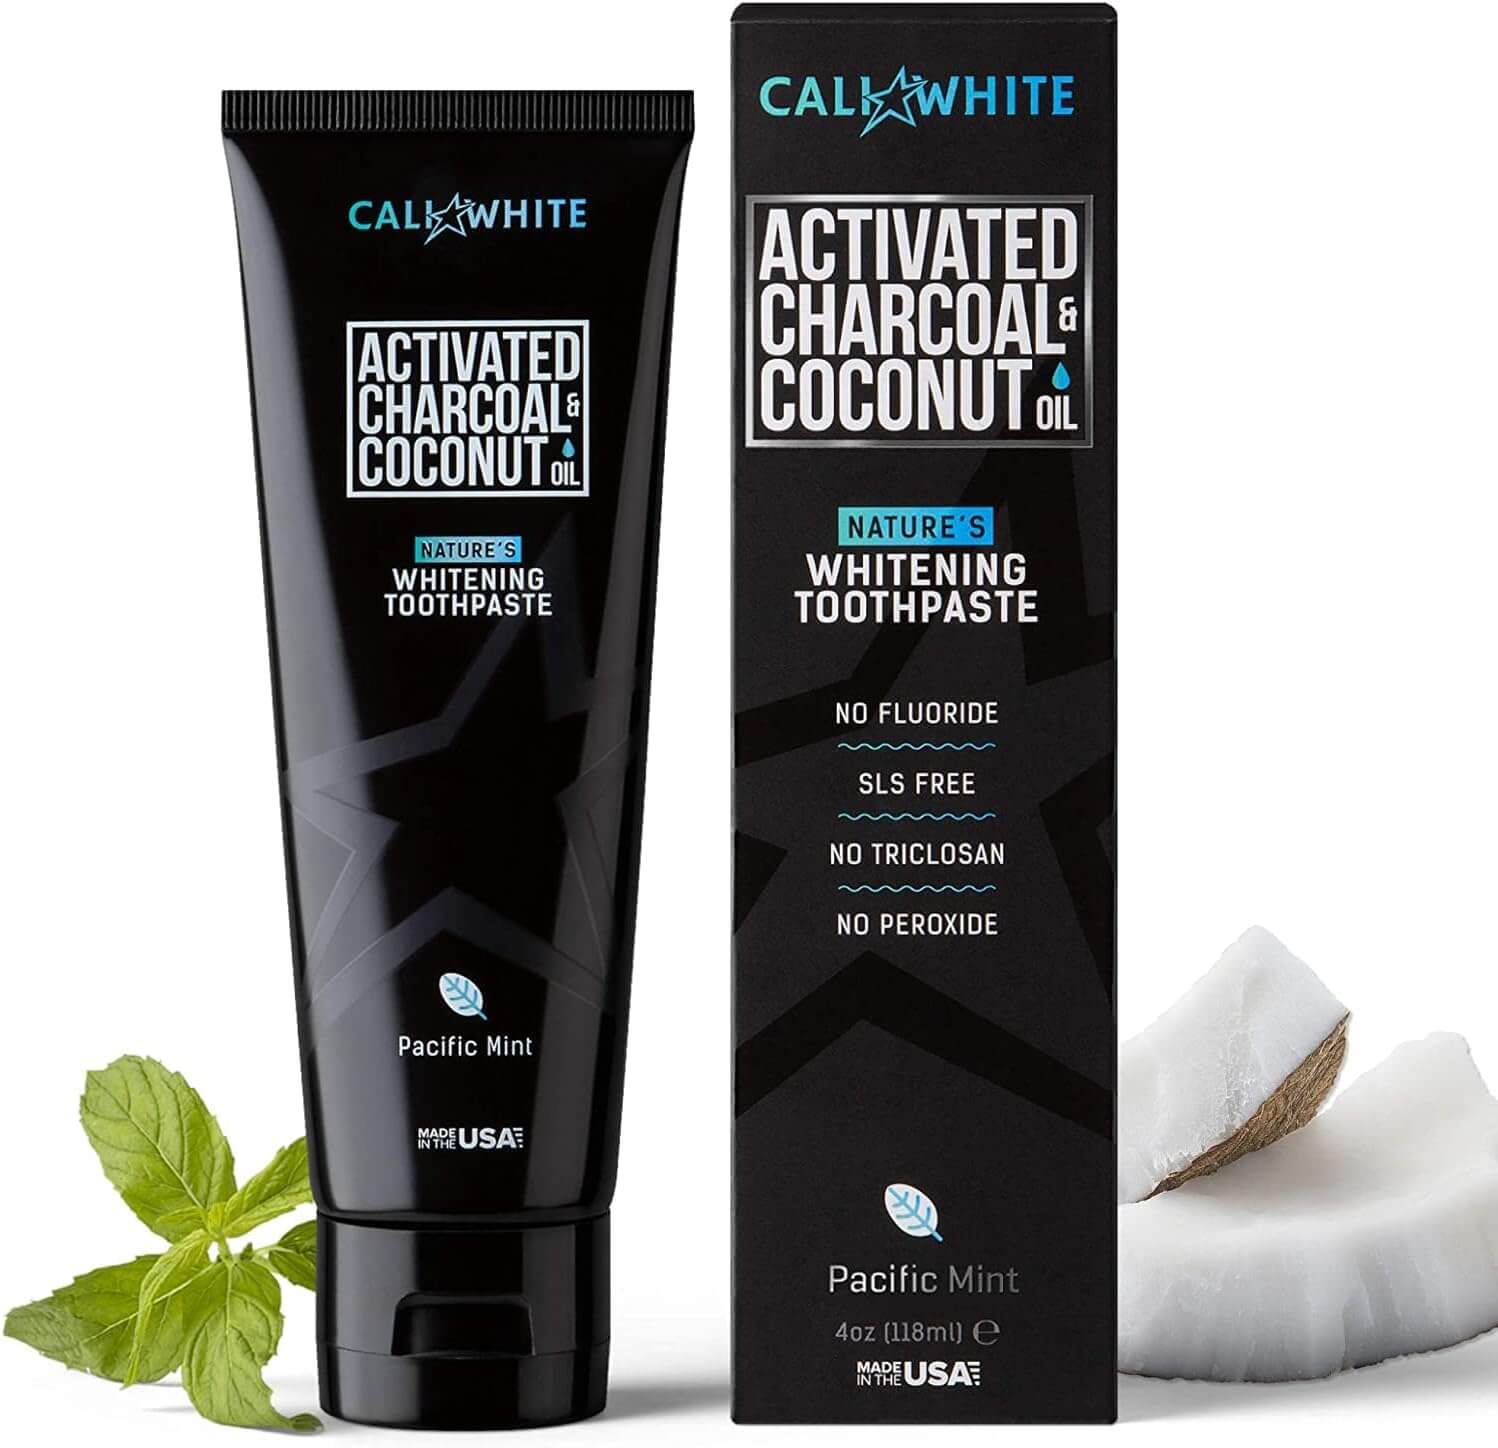 Cali White Activated Charcoal & Organic Coconut Oil Whitening Toothpaste